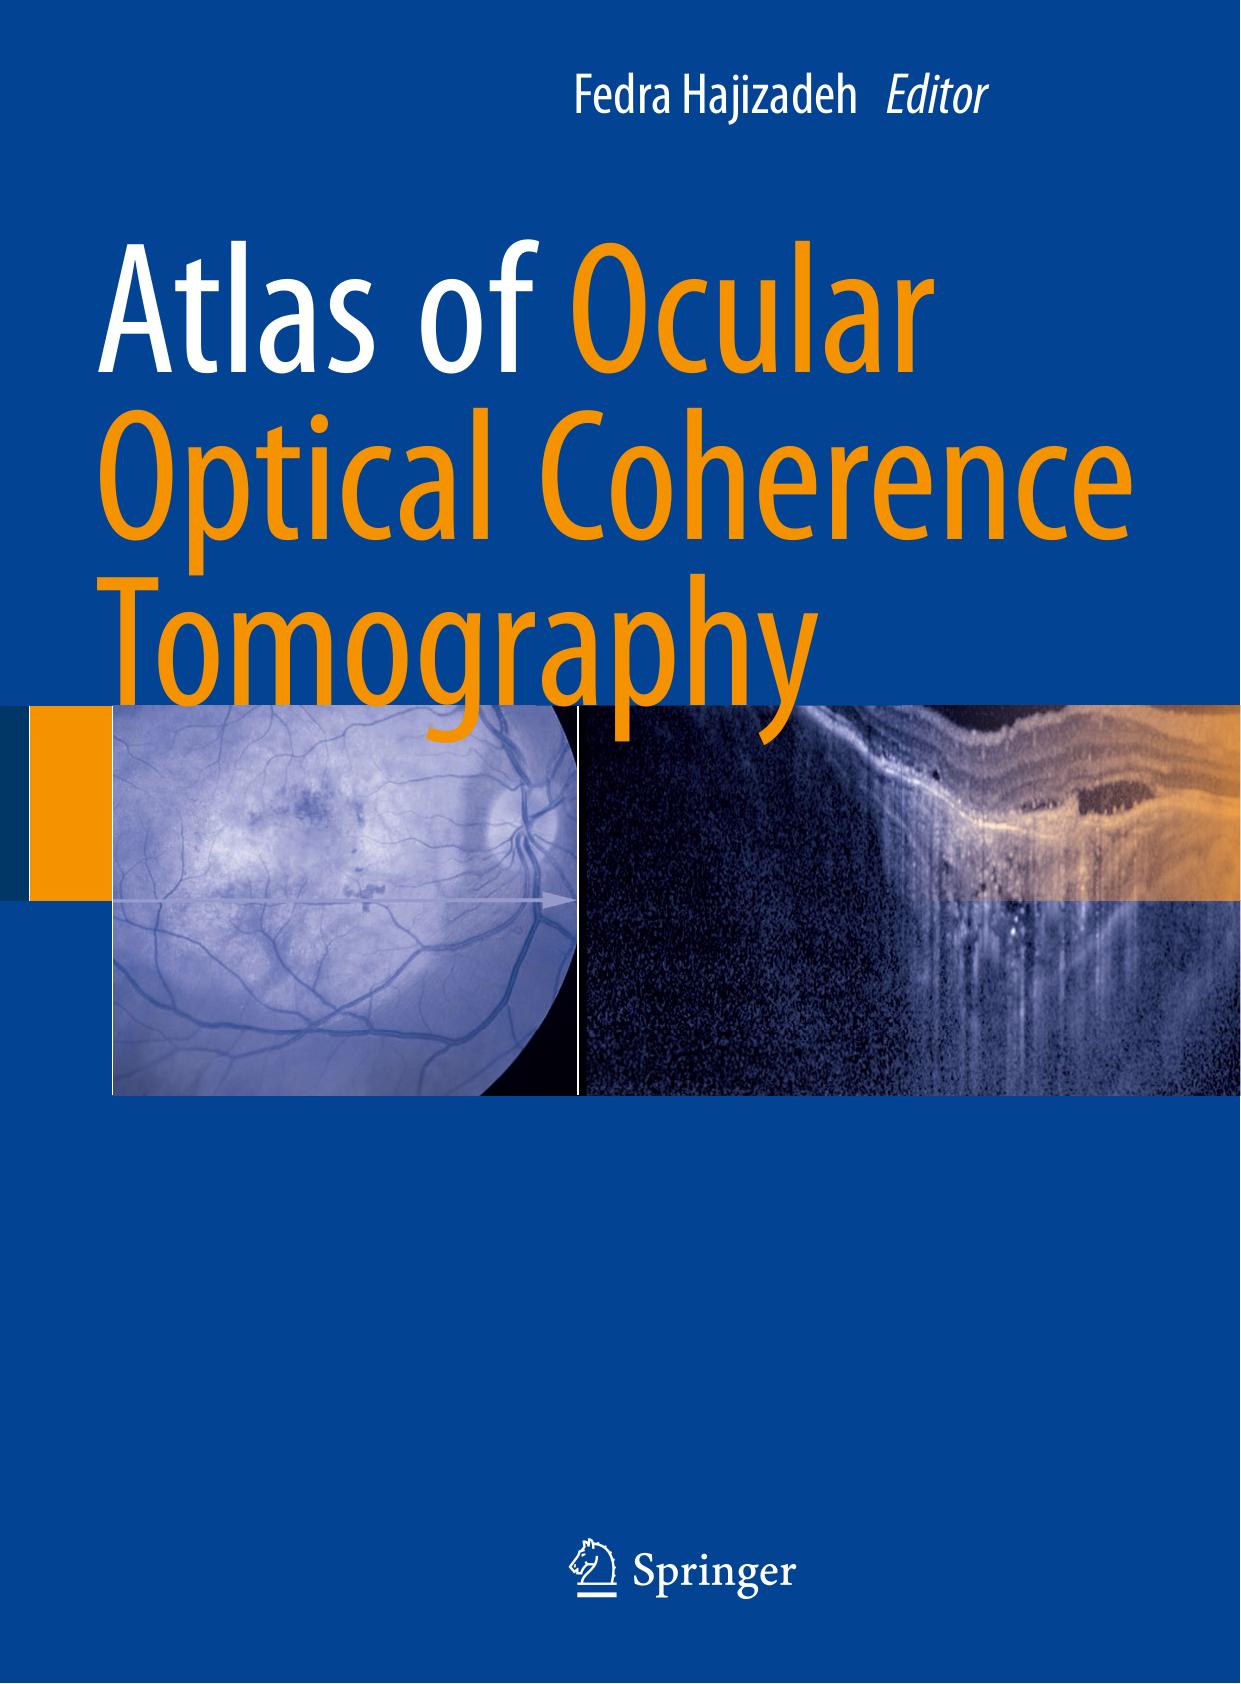 Atlas of Ocular Optical Coherence Tomography, 2018